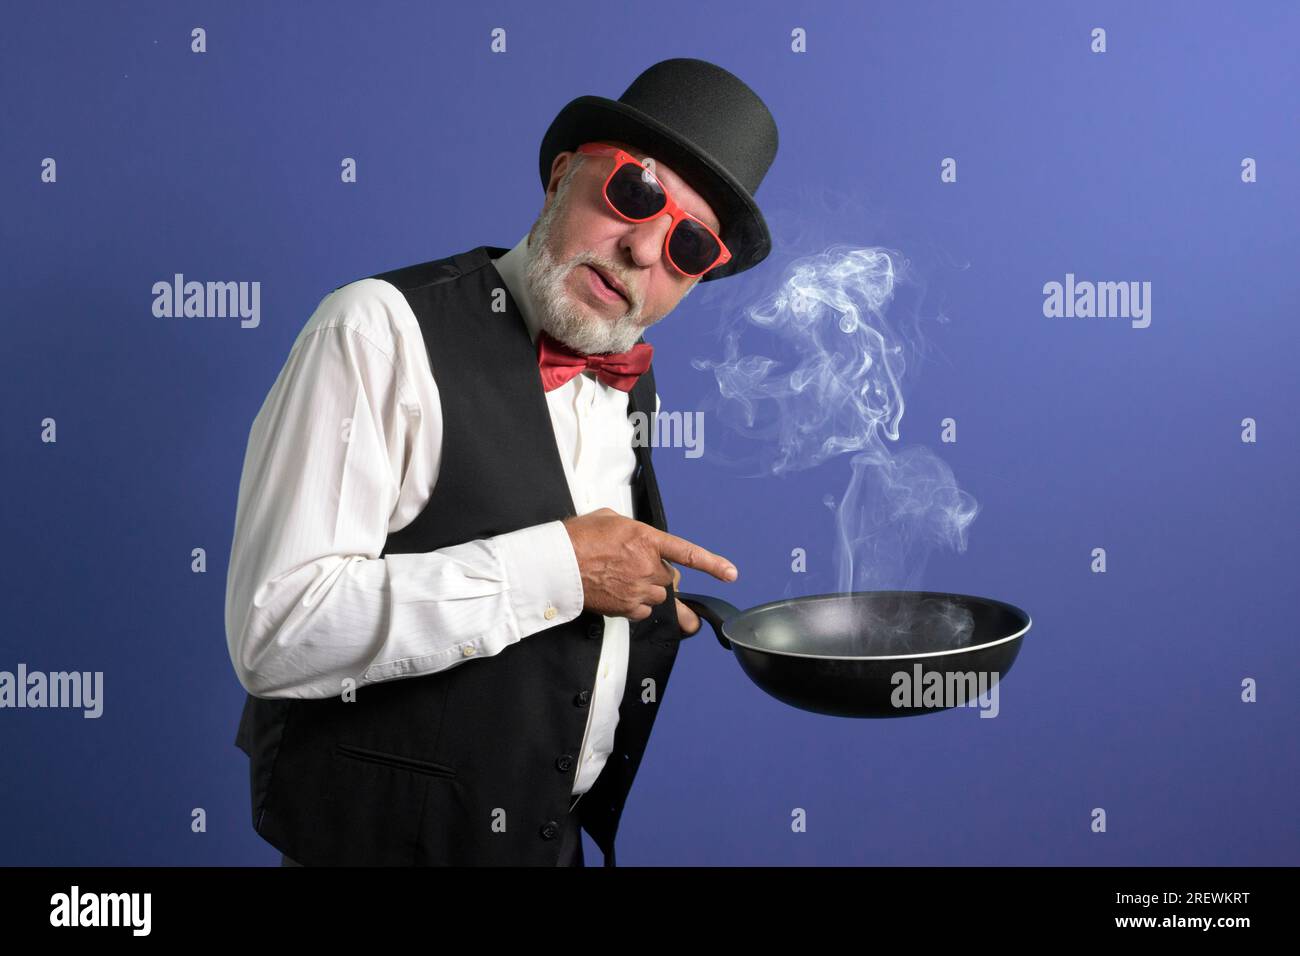 Don't forget about the kitchen. A man in festive attire with a smoky overheated frying pan calls for attention Stock Photo